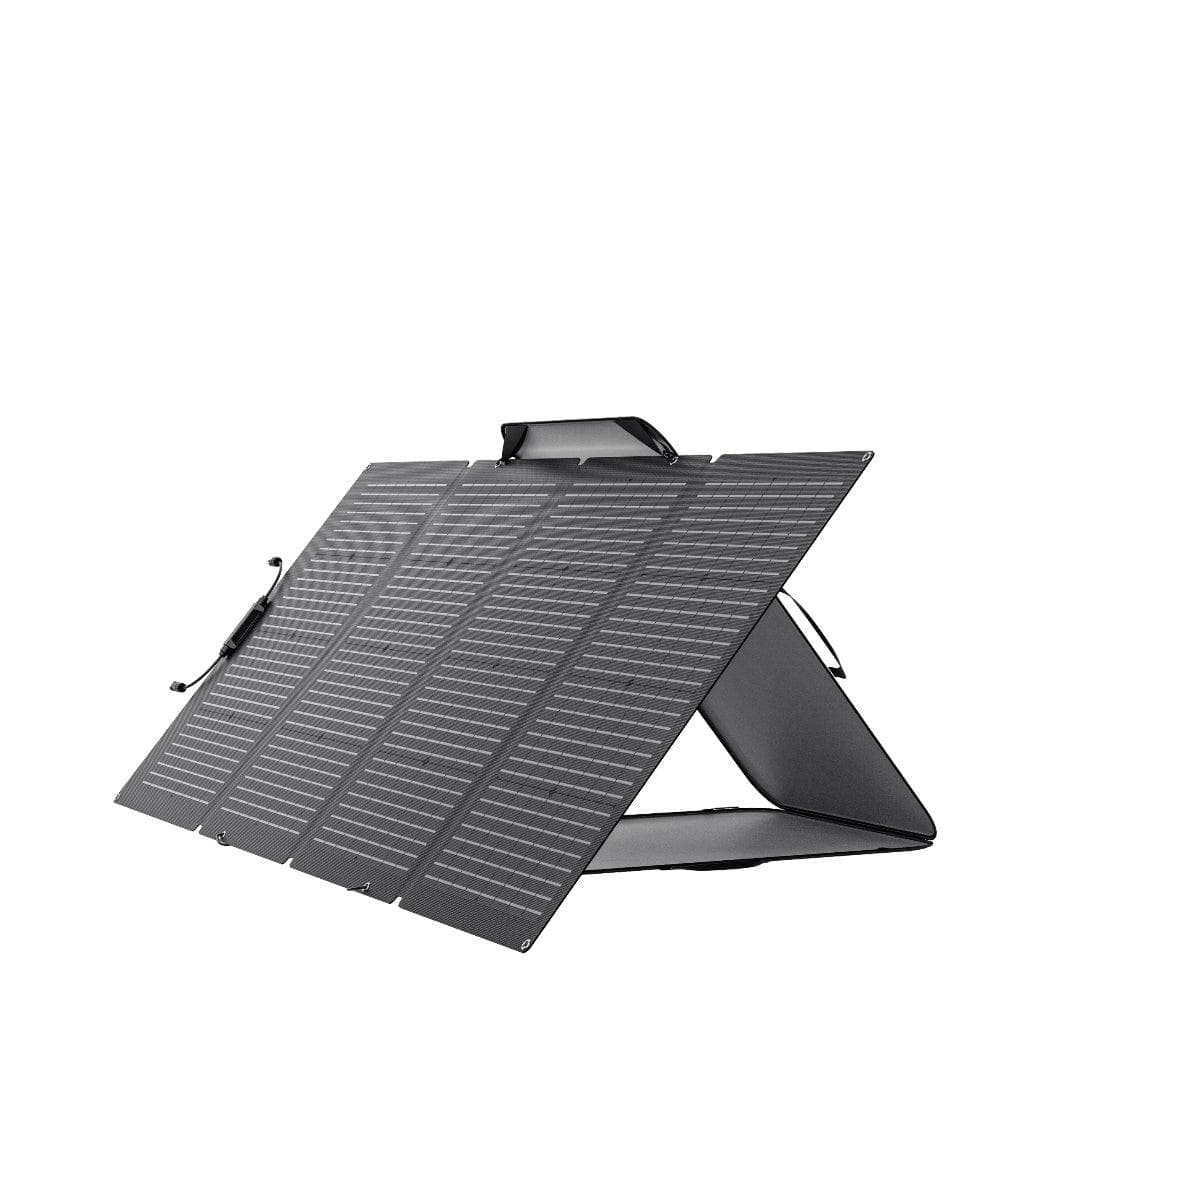 EcoFlow EcoFlow 220W Bifacial Solar Panel (Recommended Accessory) Giving Back